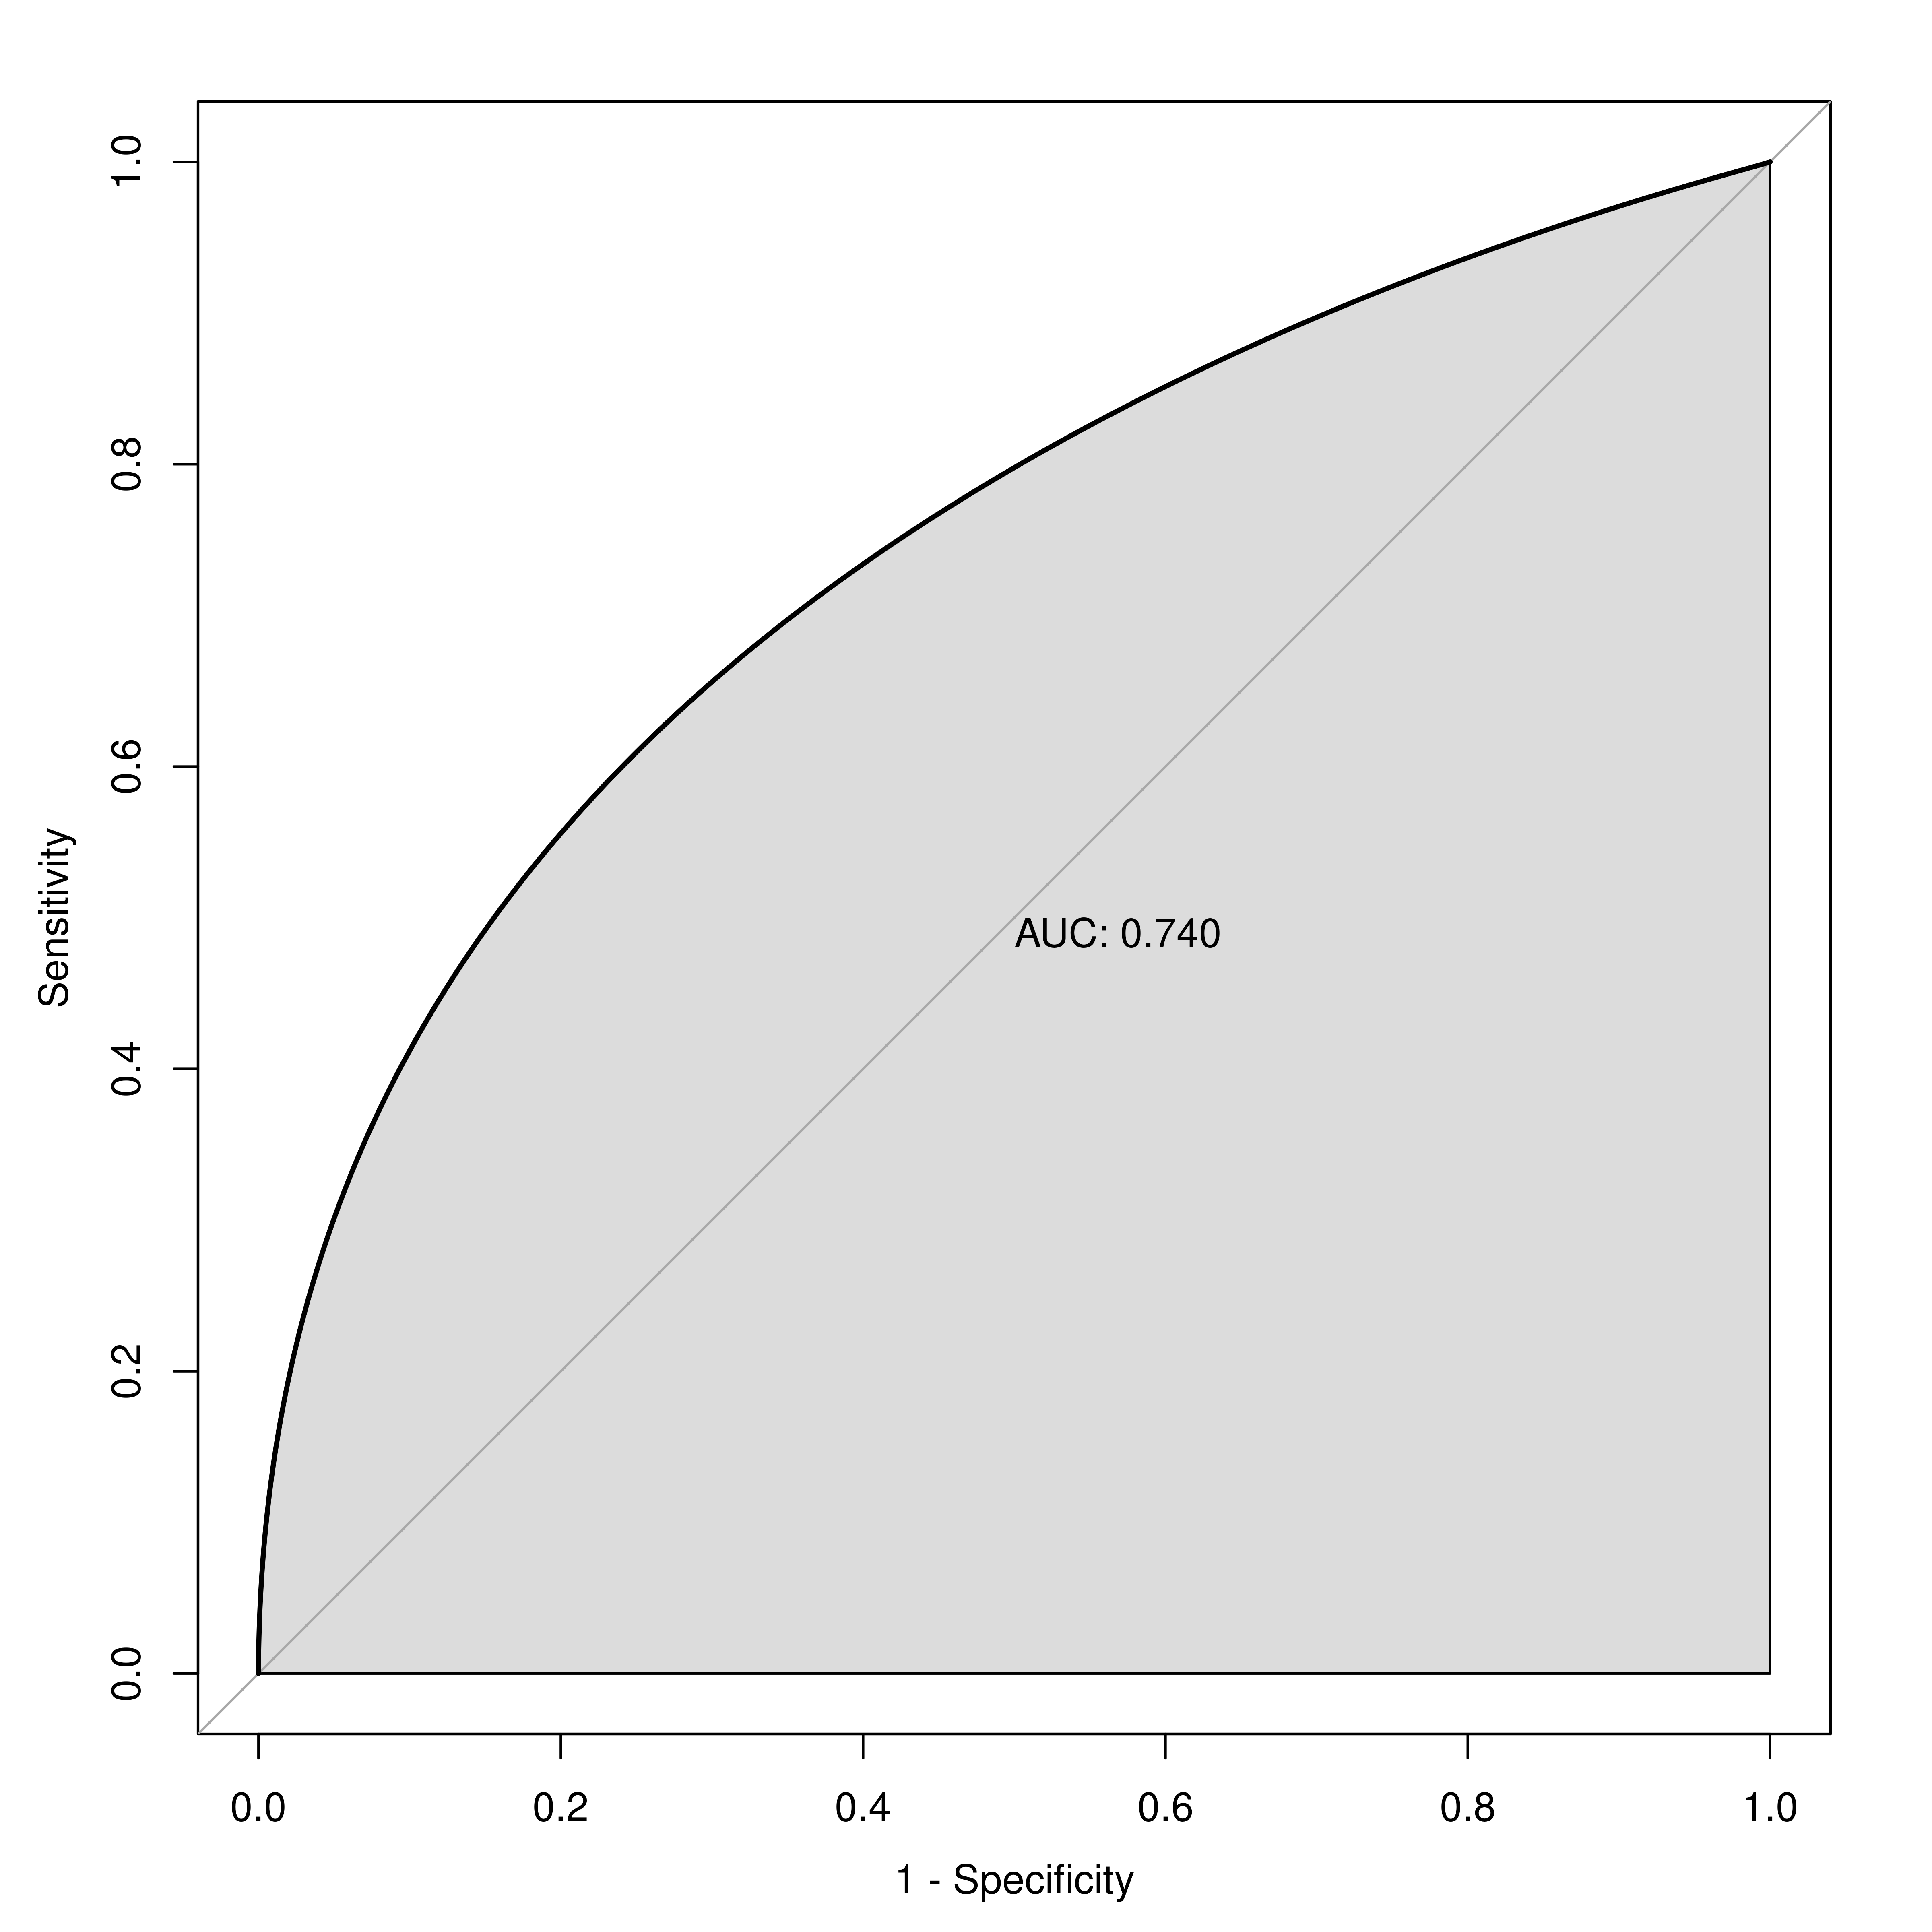 Area Under The Receiver Operating Characteristic Curve (AUC).